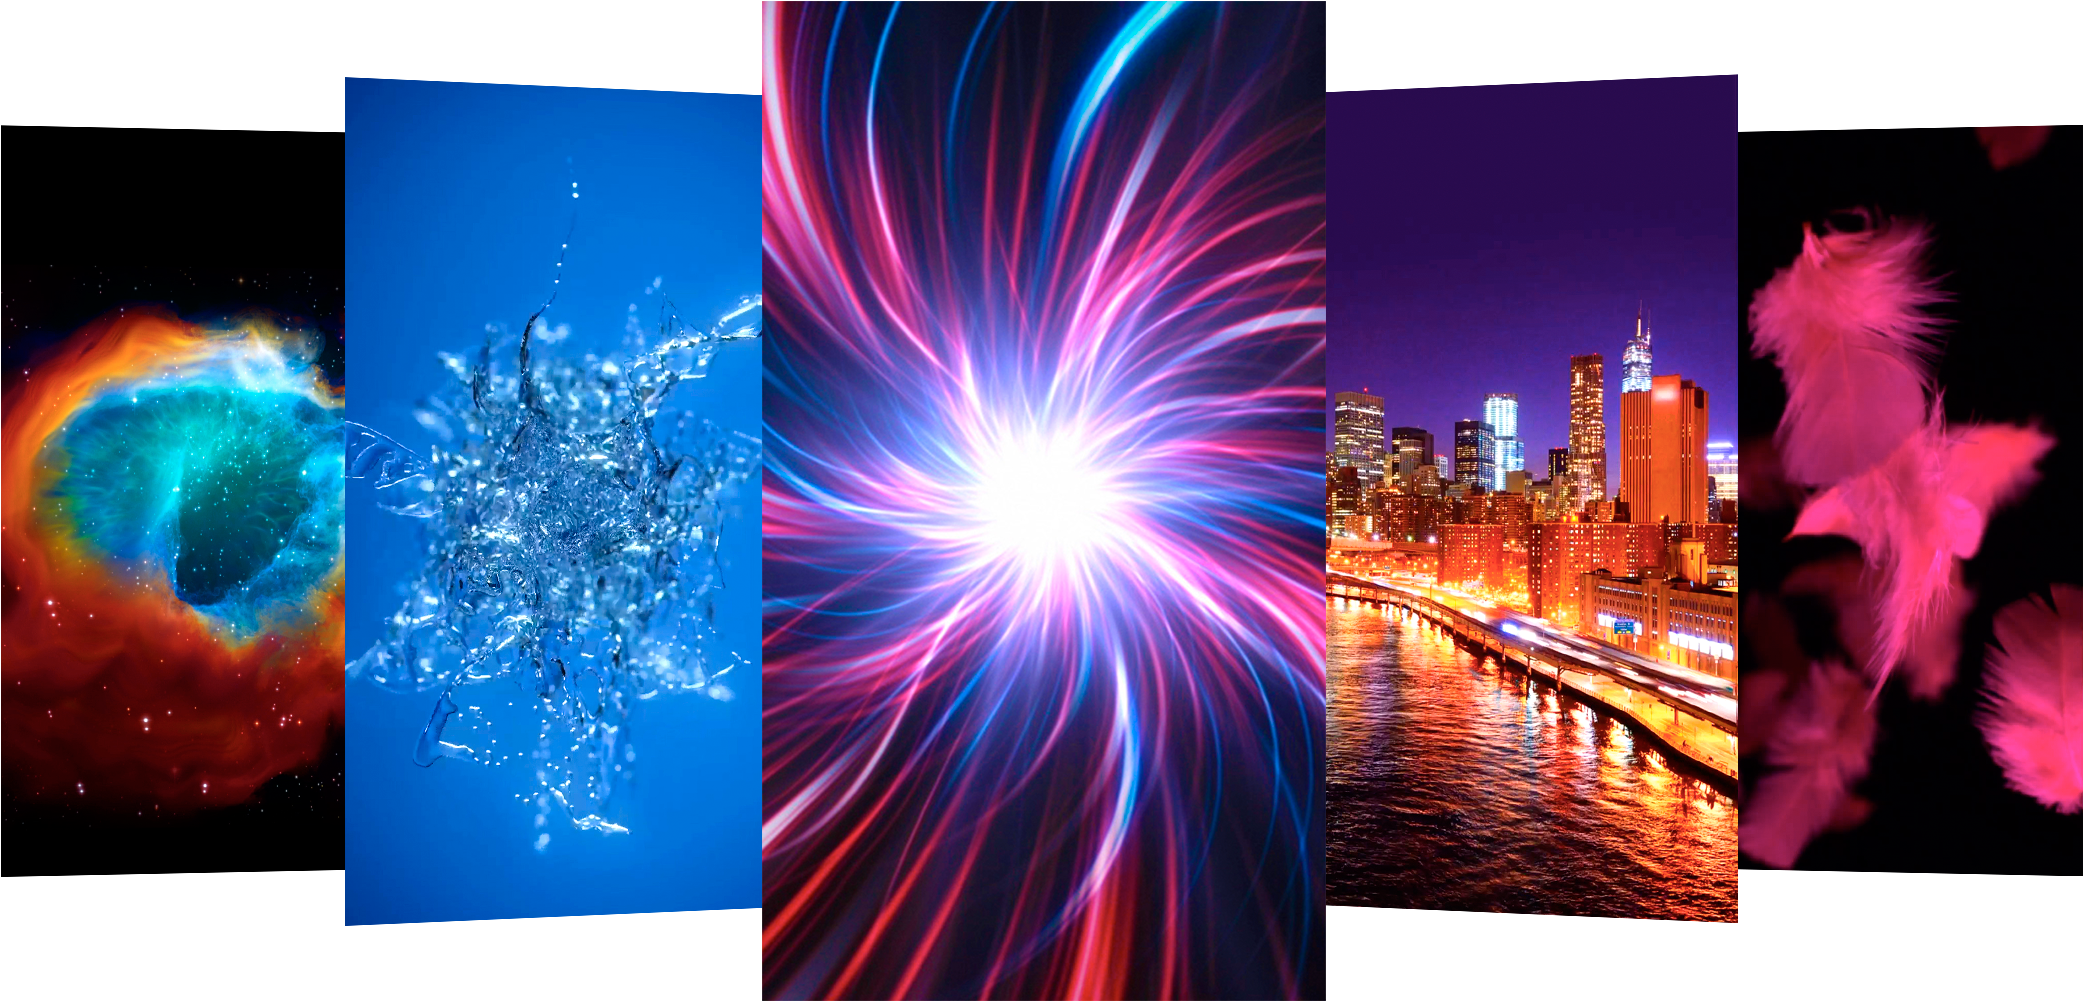 A Collage Of Different Images Of Water And A City